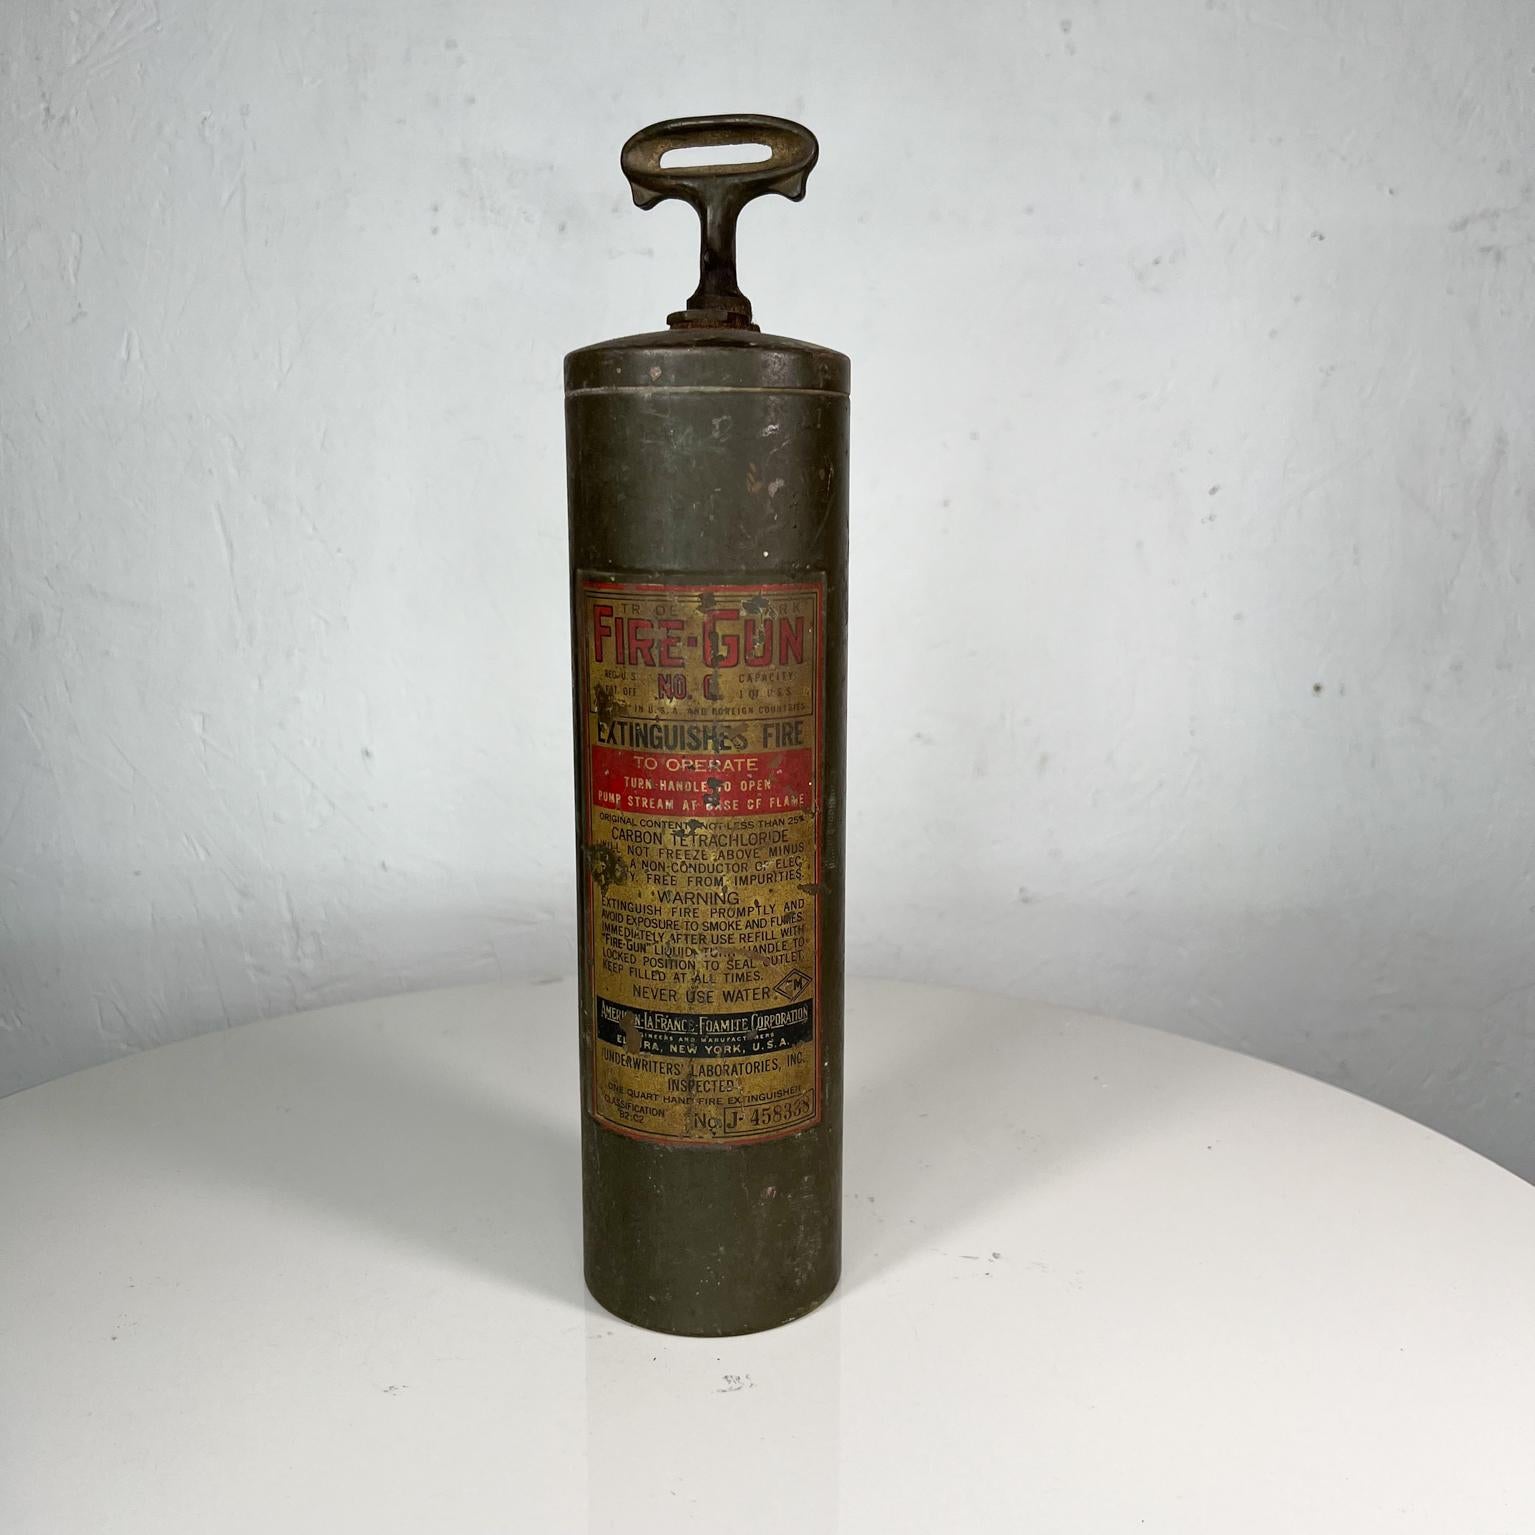 Antique brass handle fire gun extinguisher Underwriters Laboratories
Measures: 13 tall x 3 diameter
Original preowned used unrestored condition
Review images provided.